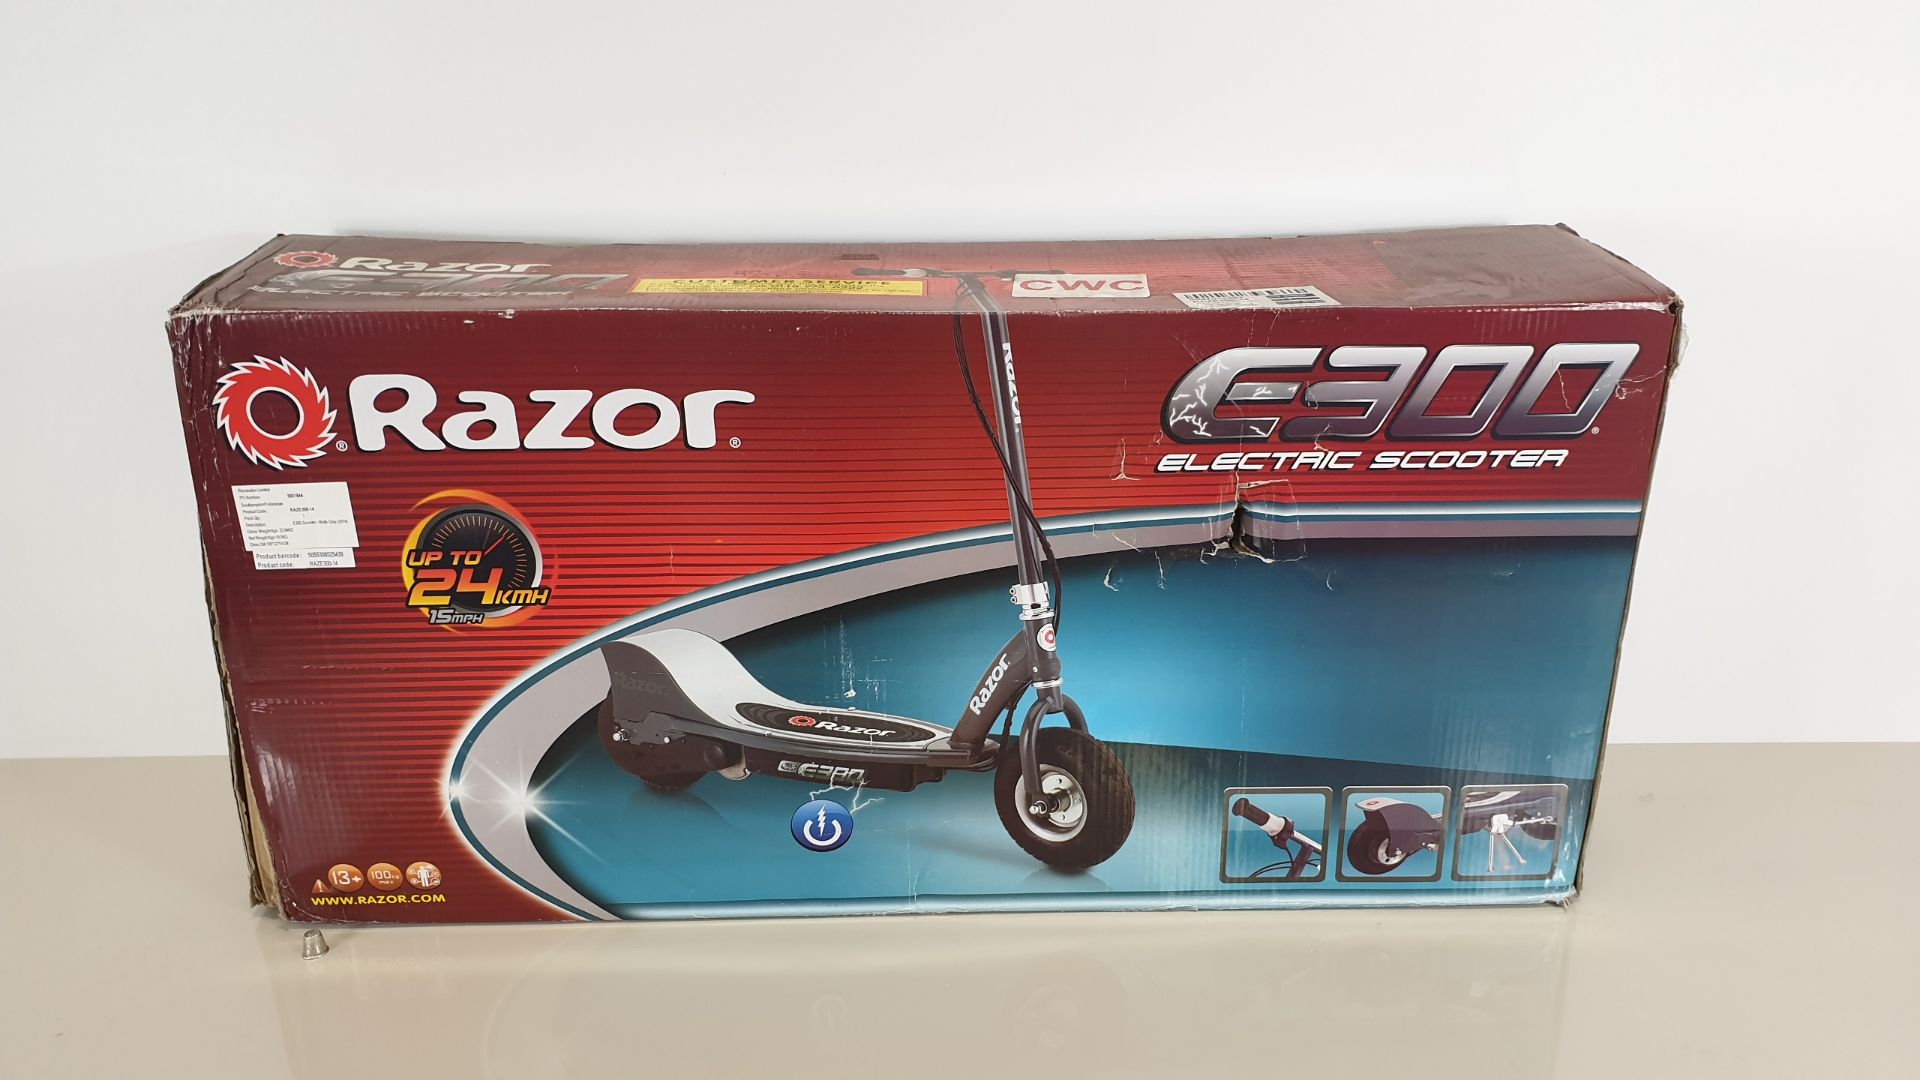 (LOT FOR THURSDAY 28TH MAY AUCTION) BRAND NEW BOXED RAZOR E300 ELECTRIC SCOOTER (UP TO 24KMH) (